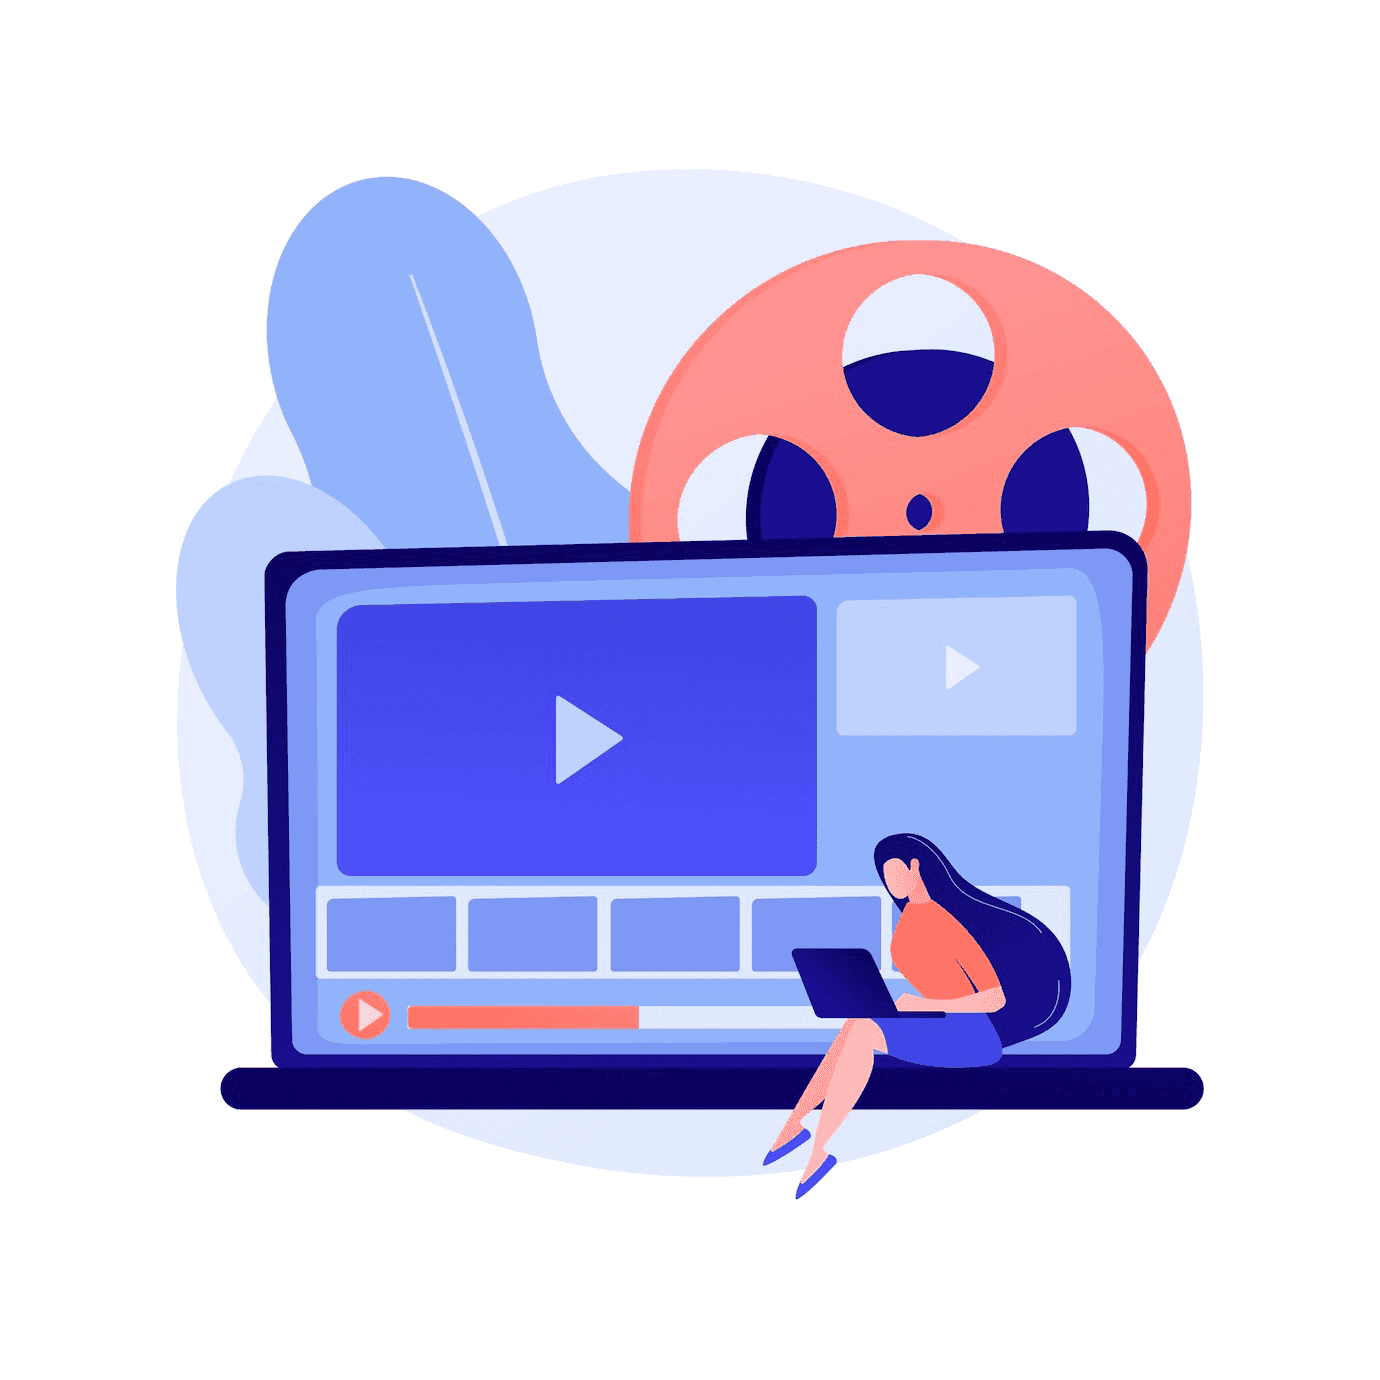 7 Reasons You Need Explainer Videos to Tell Your Brand Story